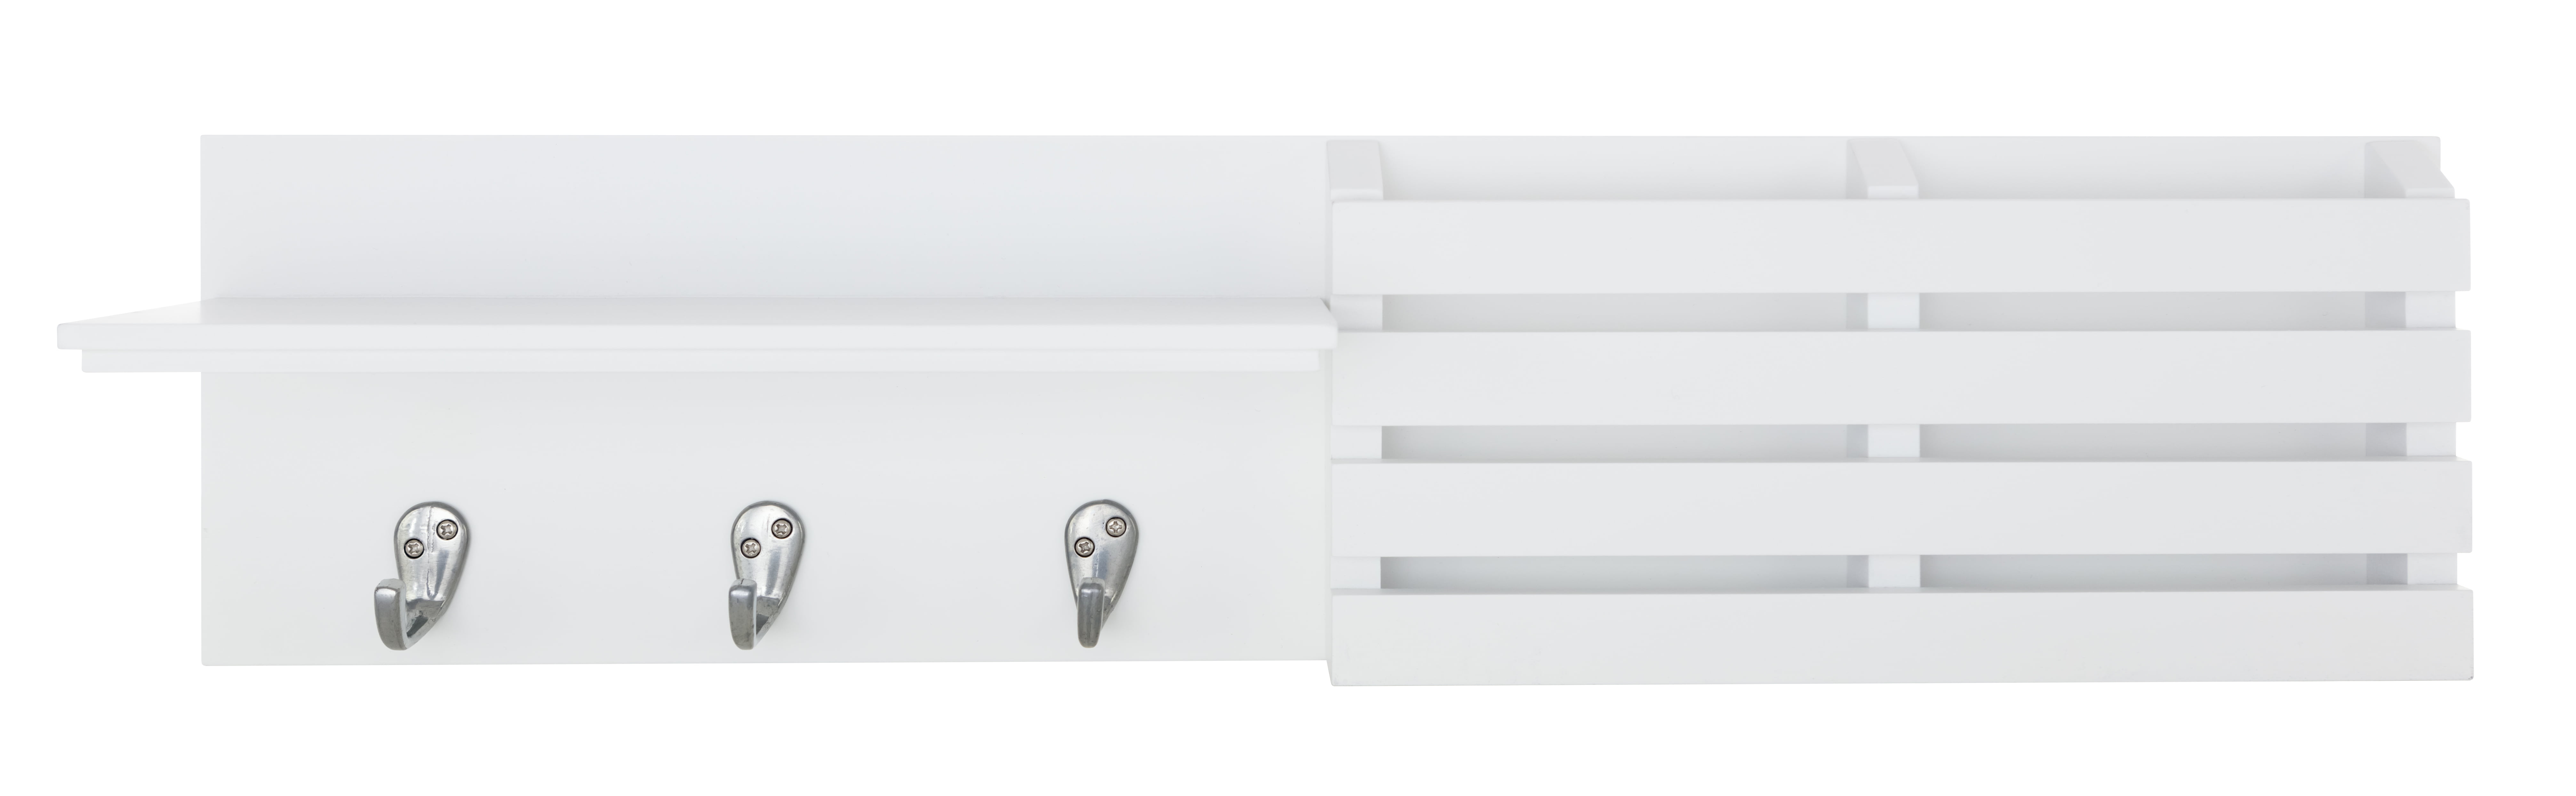 Kiera Grace Sydney Wall Shelf and Mail Holder with 3 Hooks 24-Inch by 6-Inch, 